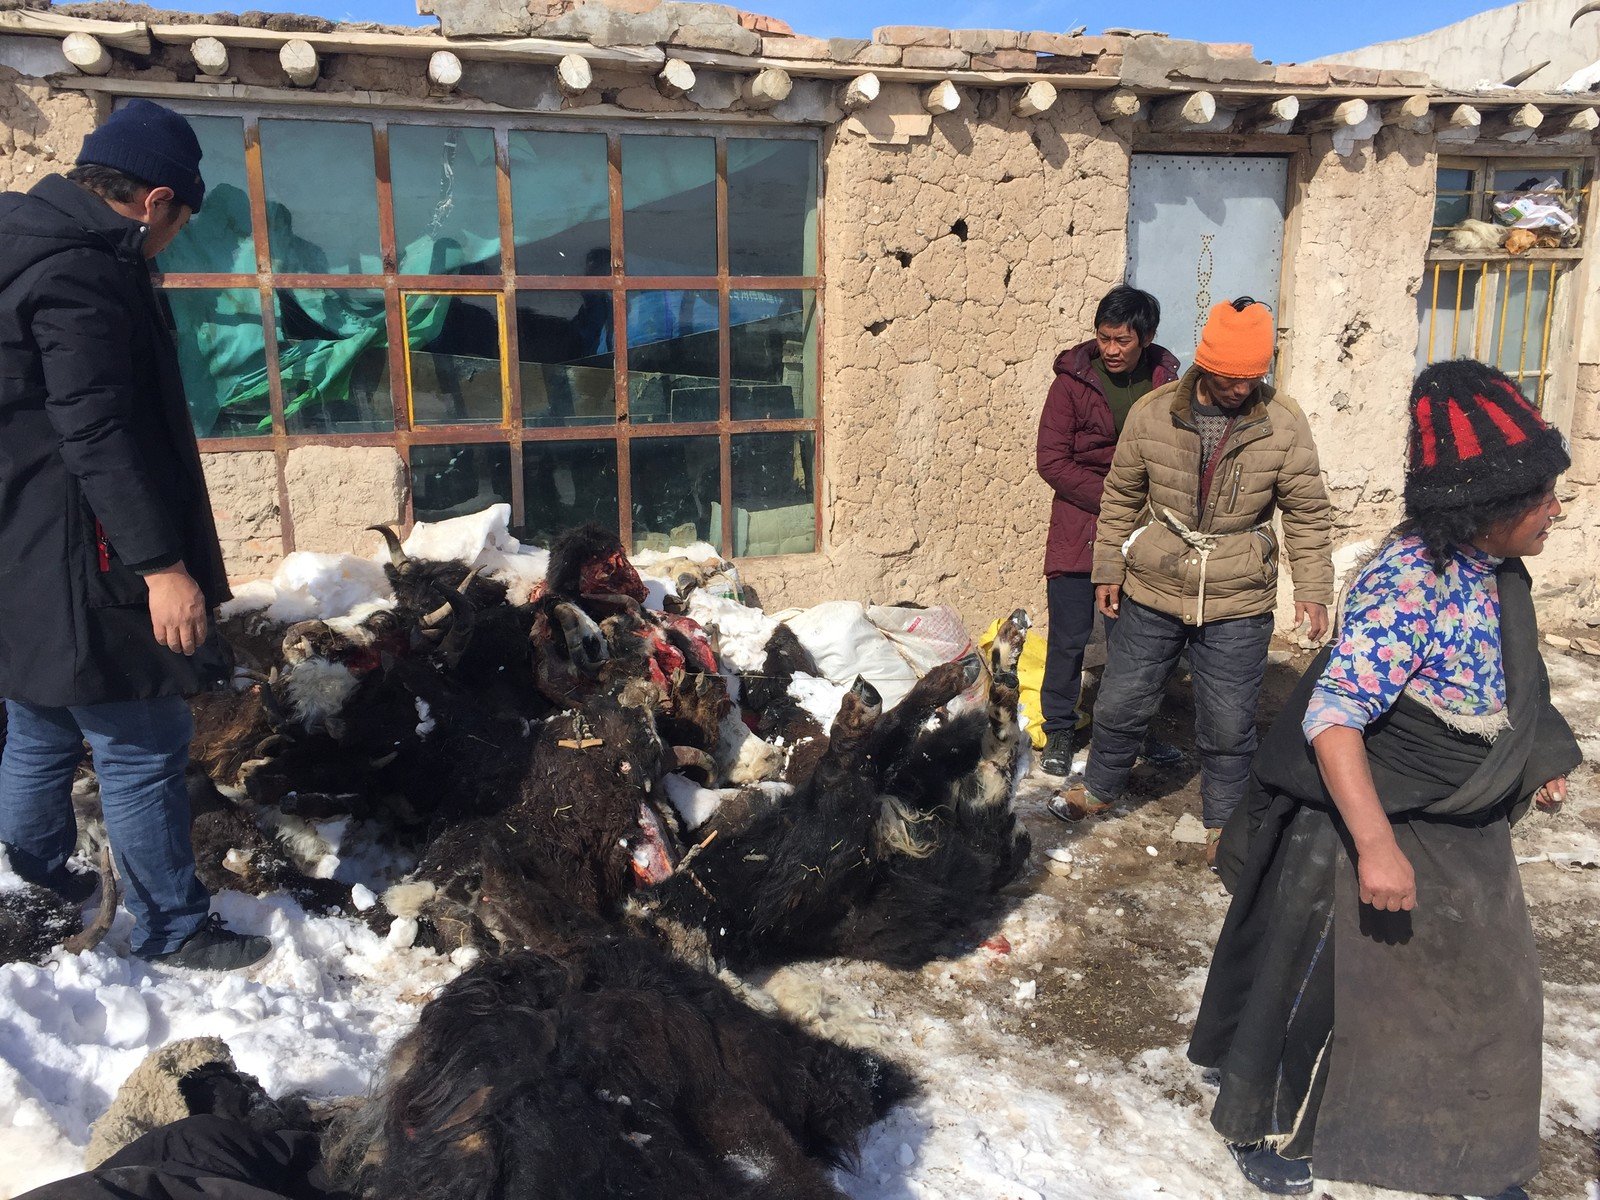 The blizzard killed around 5,000 livestock in Chengduo Country.